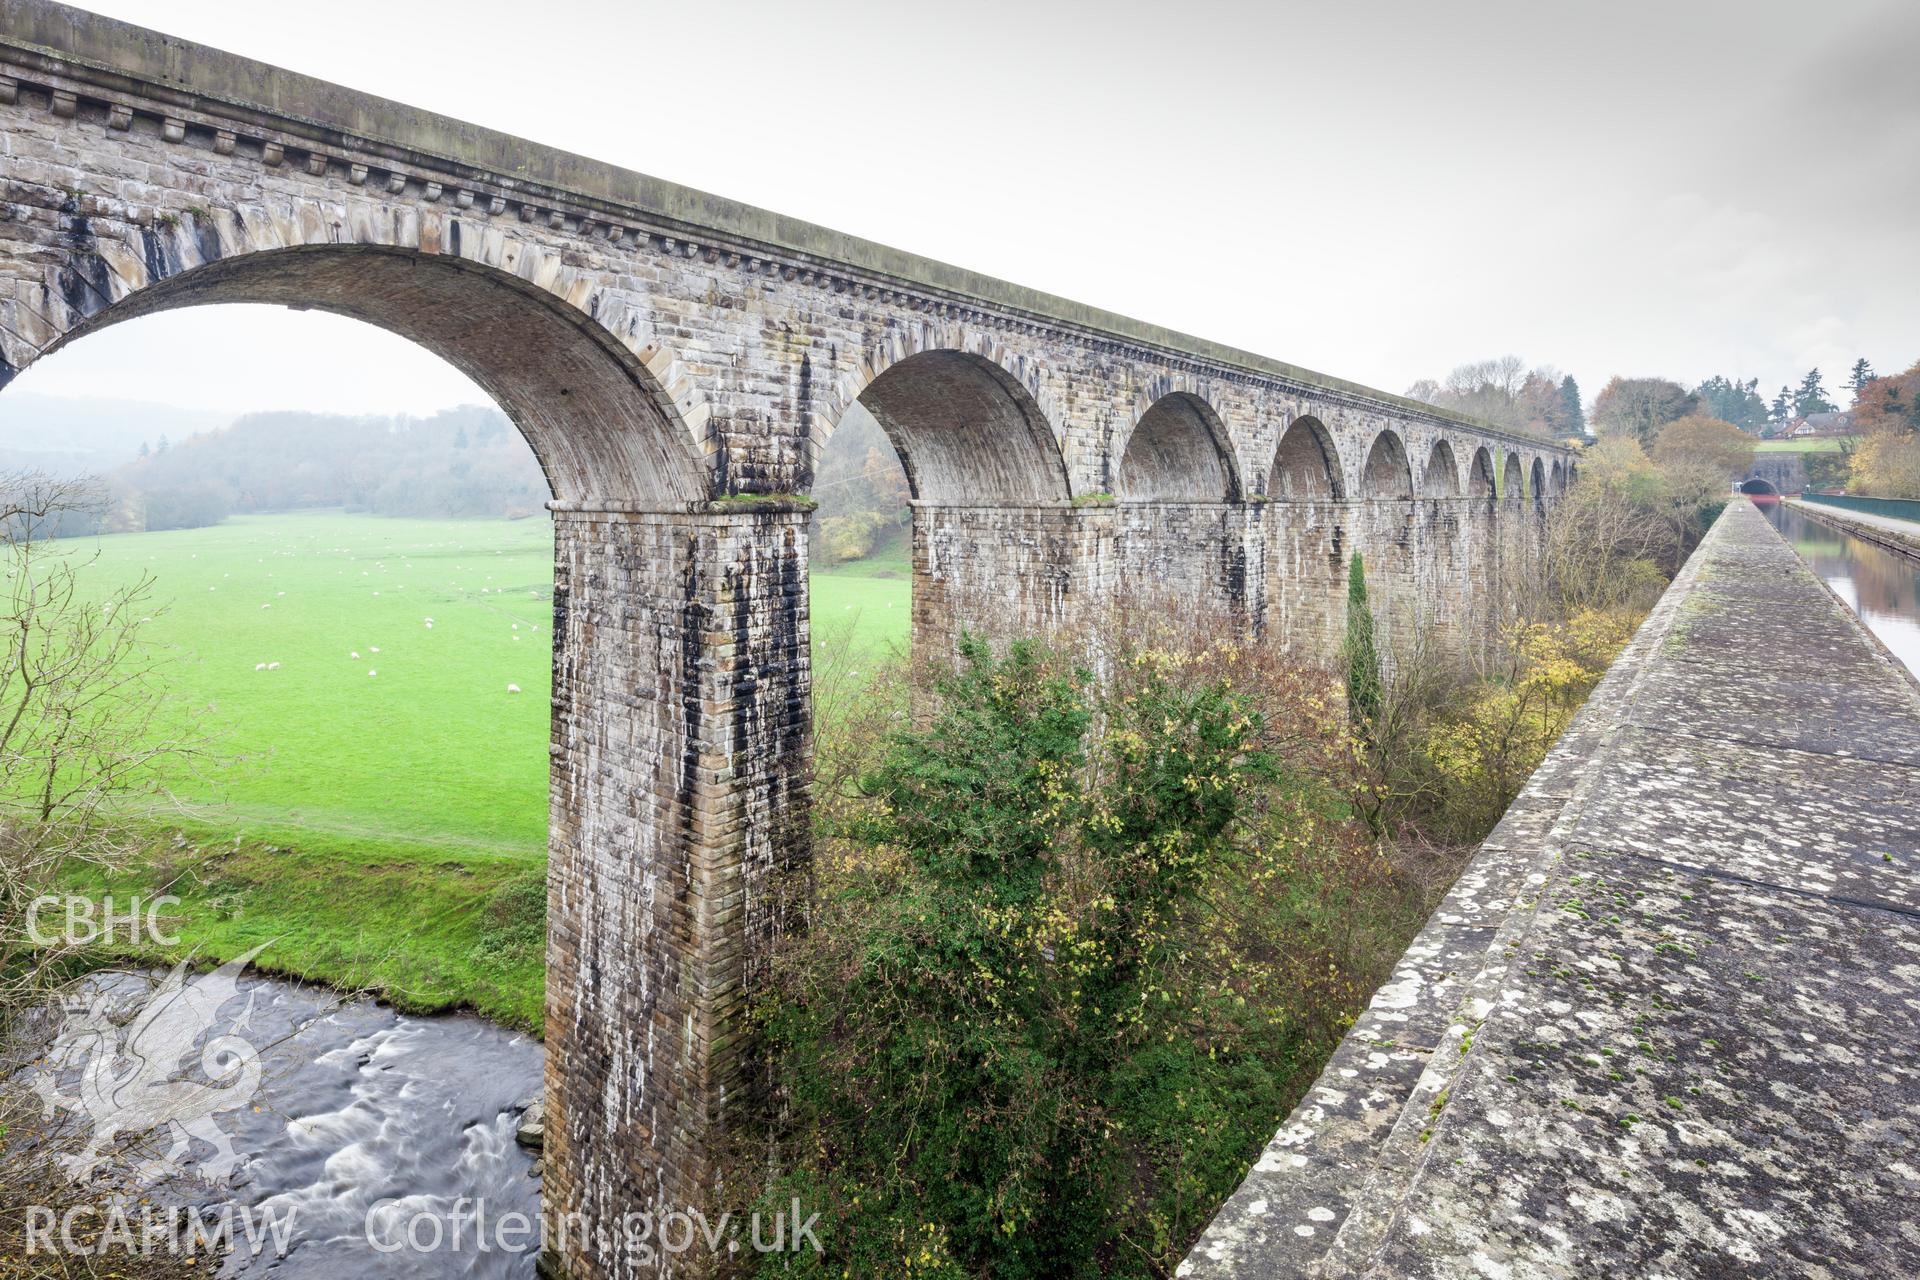 Railway viaduct viewed from the canal aquaduct, looking north northwest